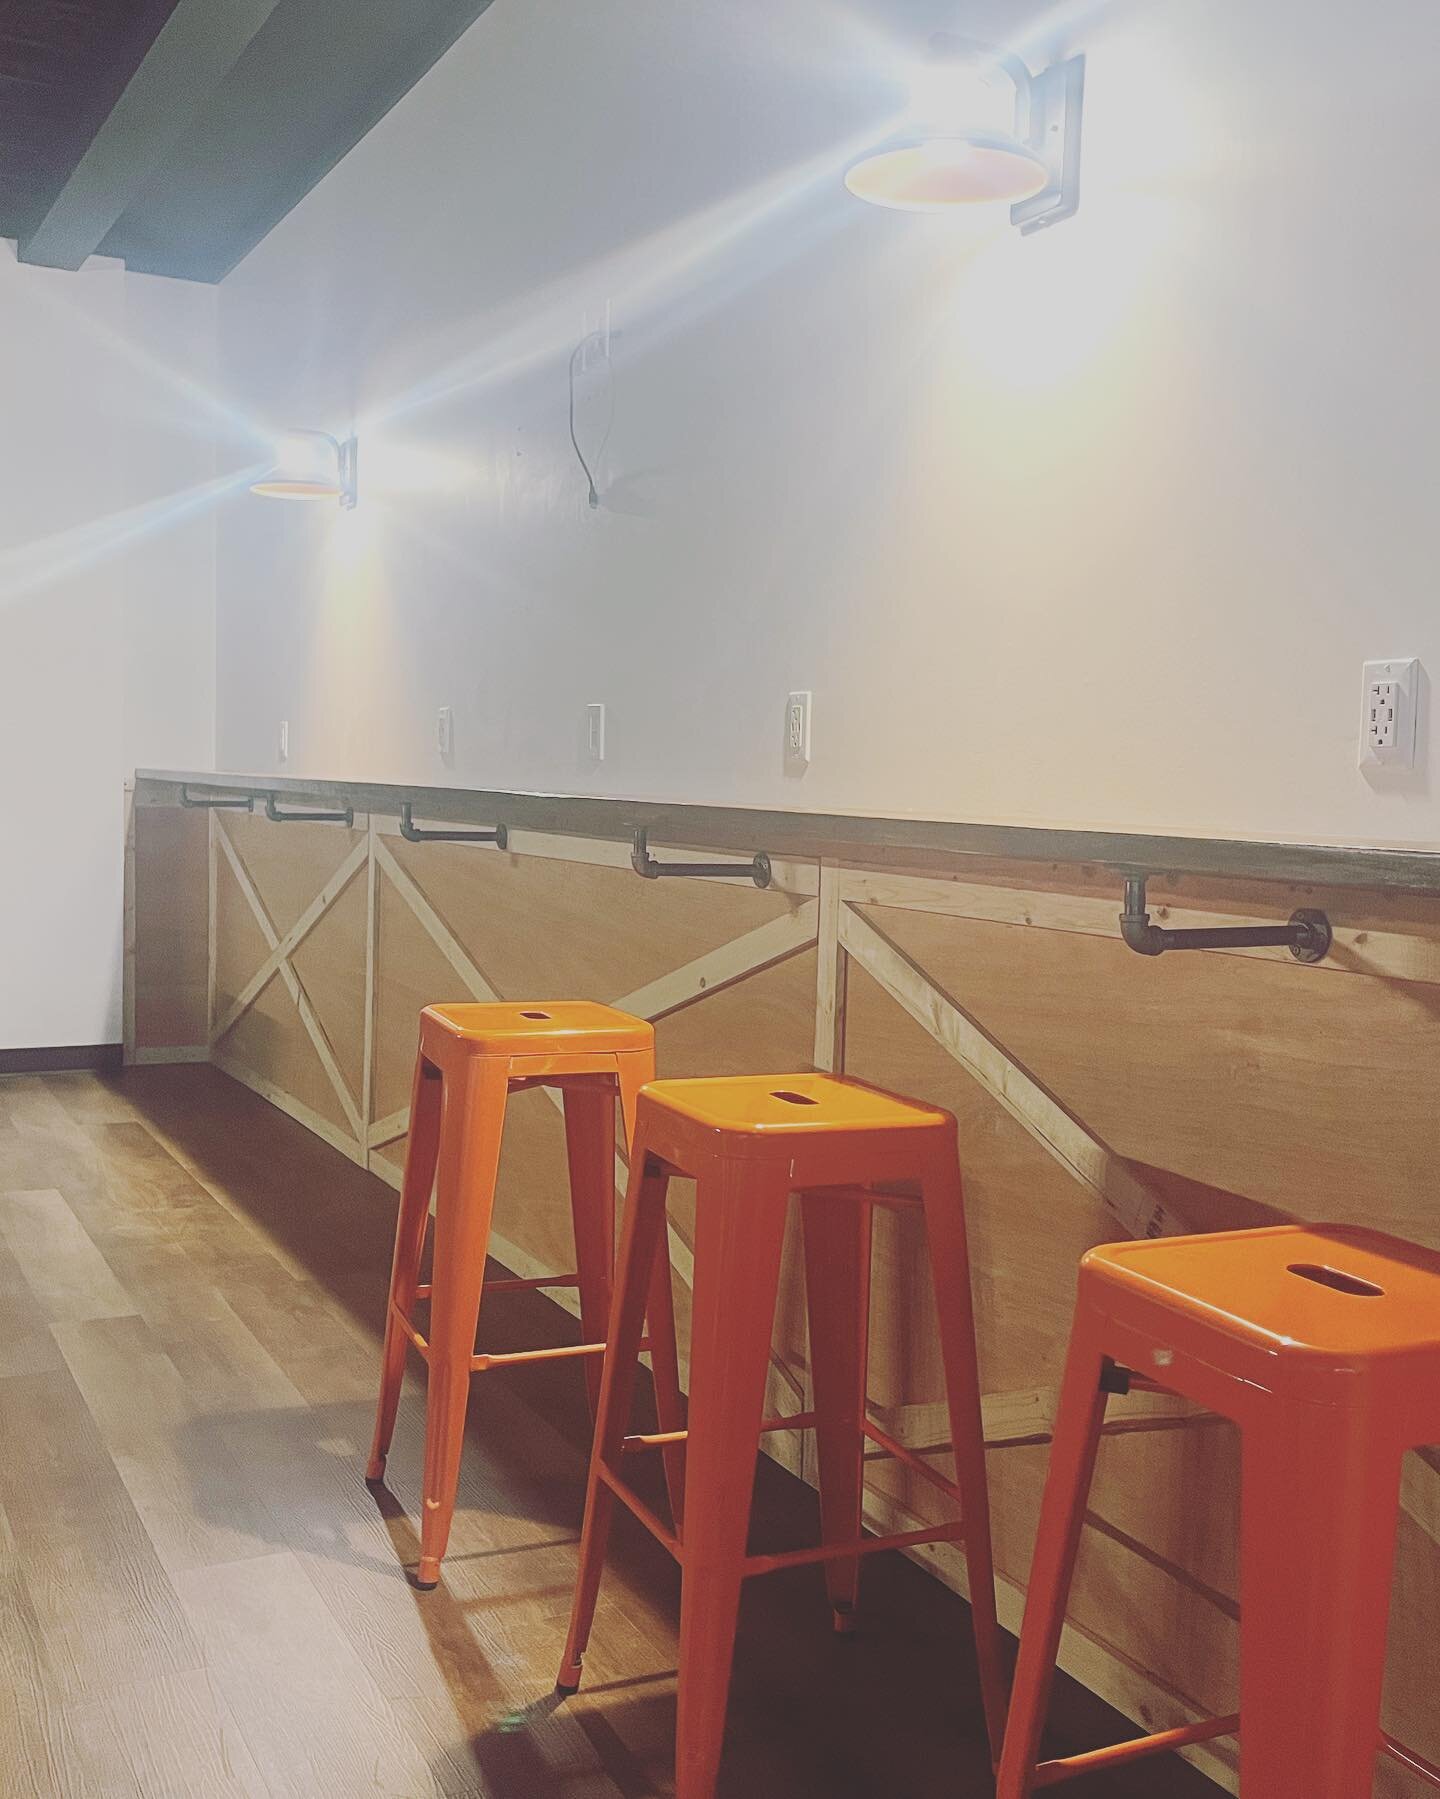 Cafe is getting closer to completion!